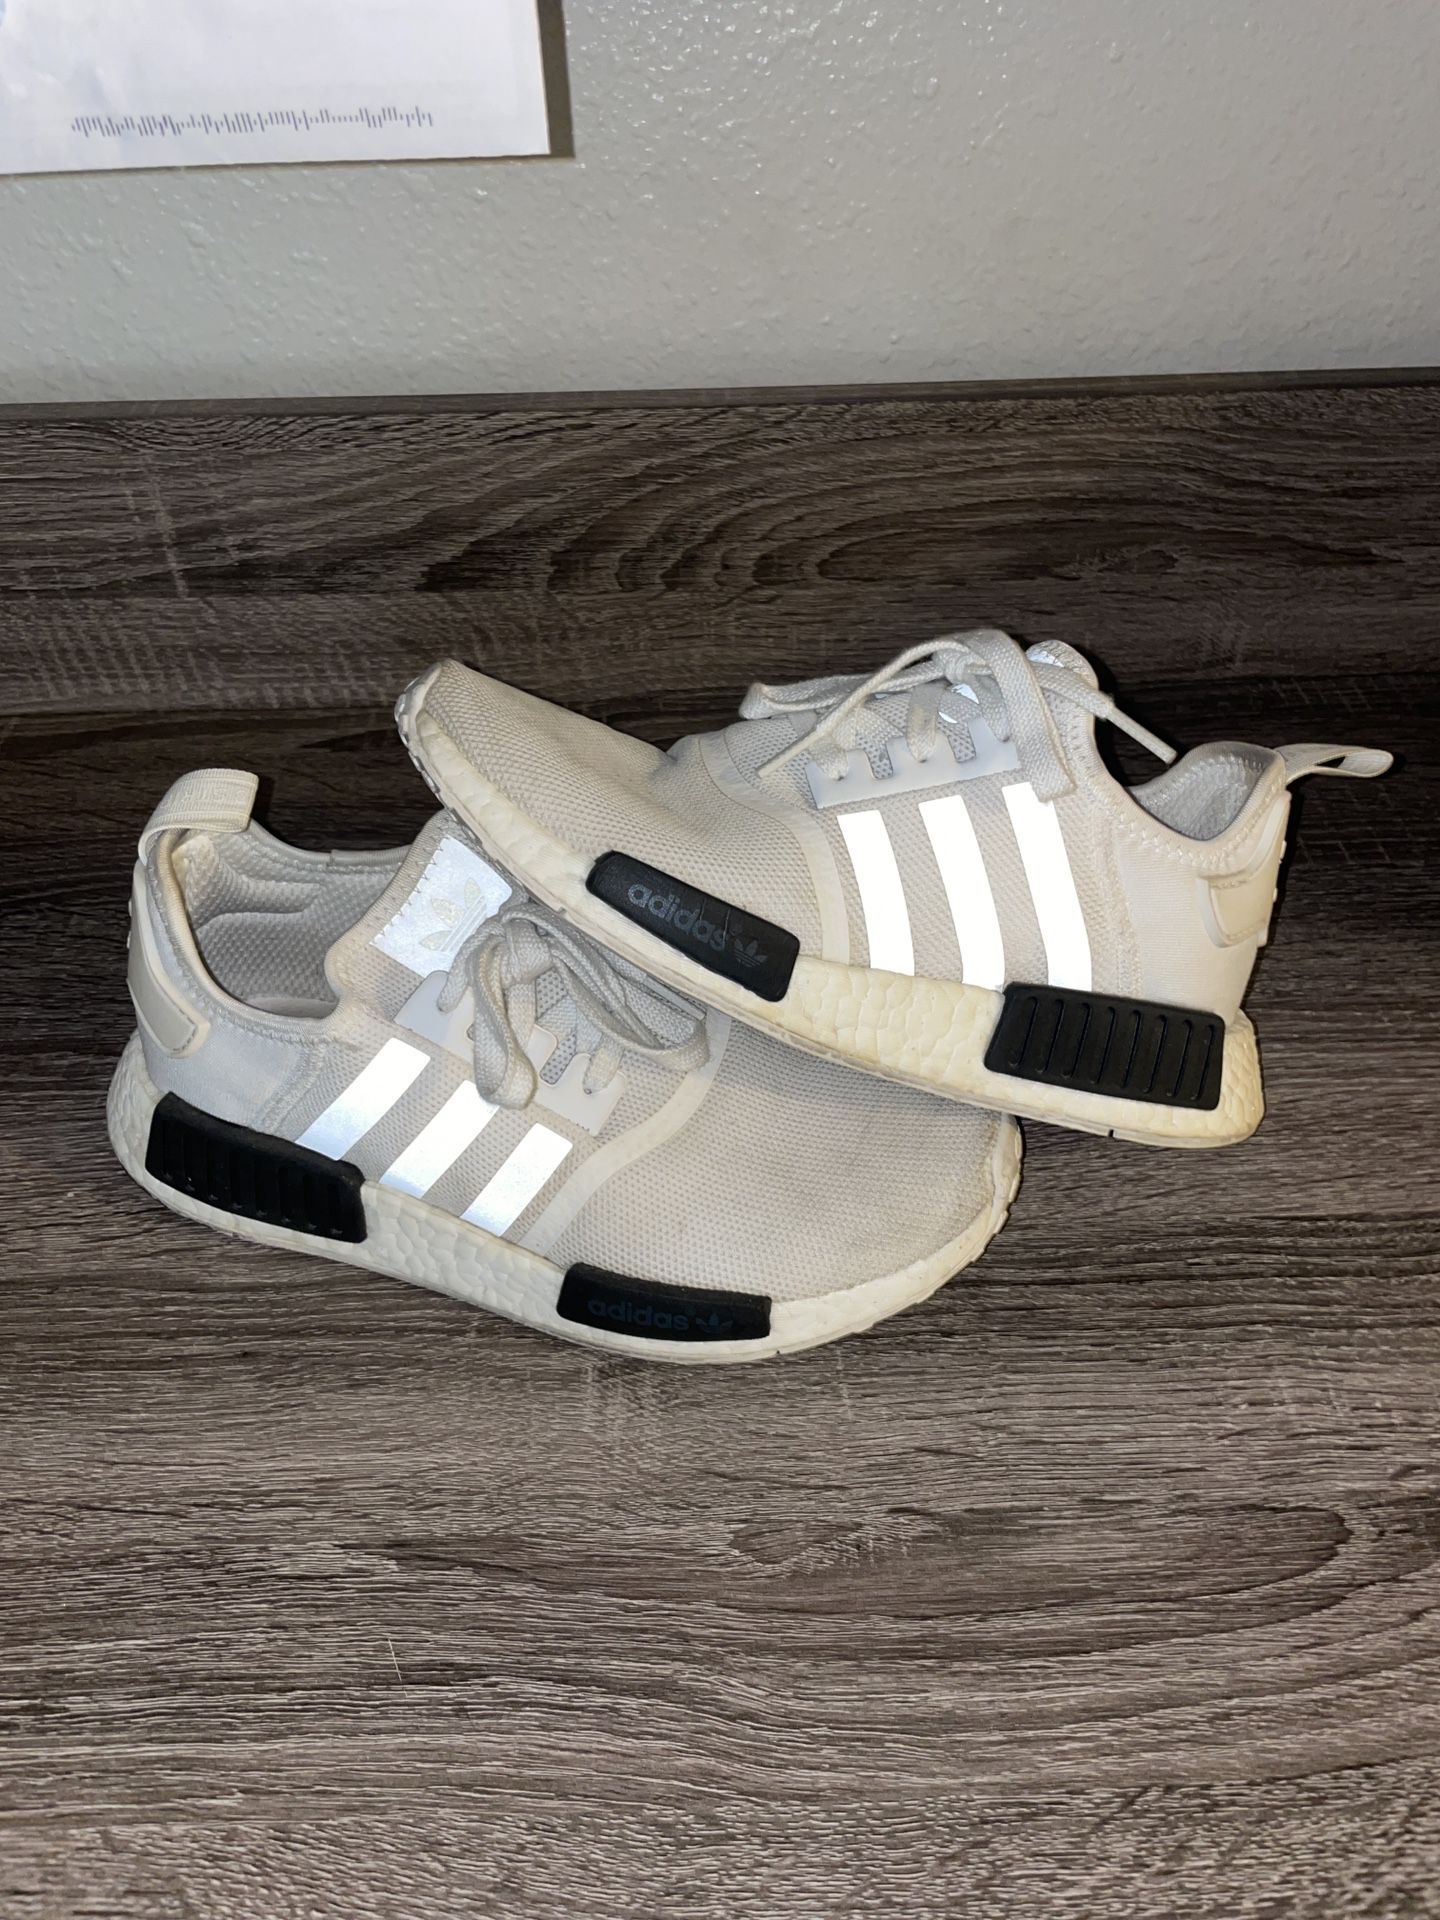 Custom Camo Adidas NMD R1 - Size 10.5 for Sale in Los Angeles, CA - OfferUp